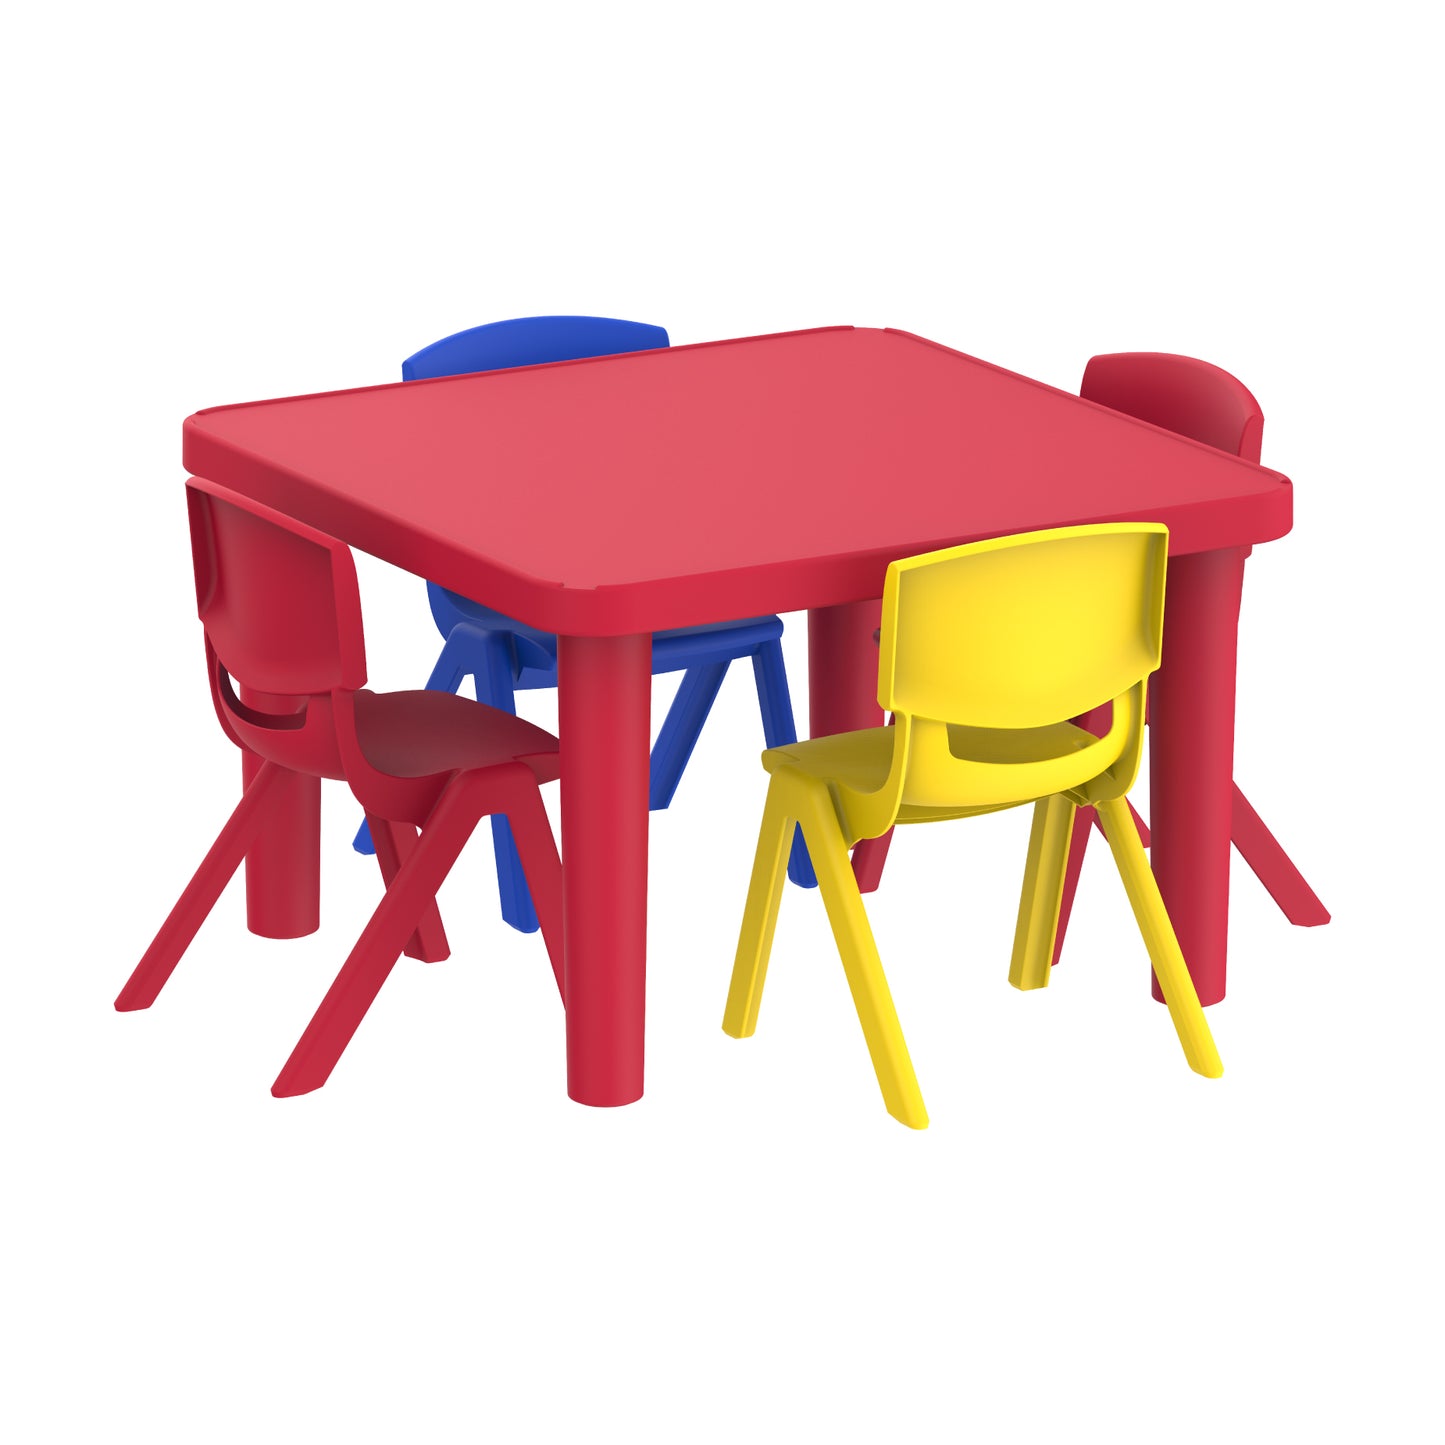 Kindergarten Table Square & 4 Chairs